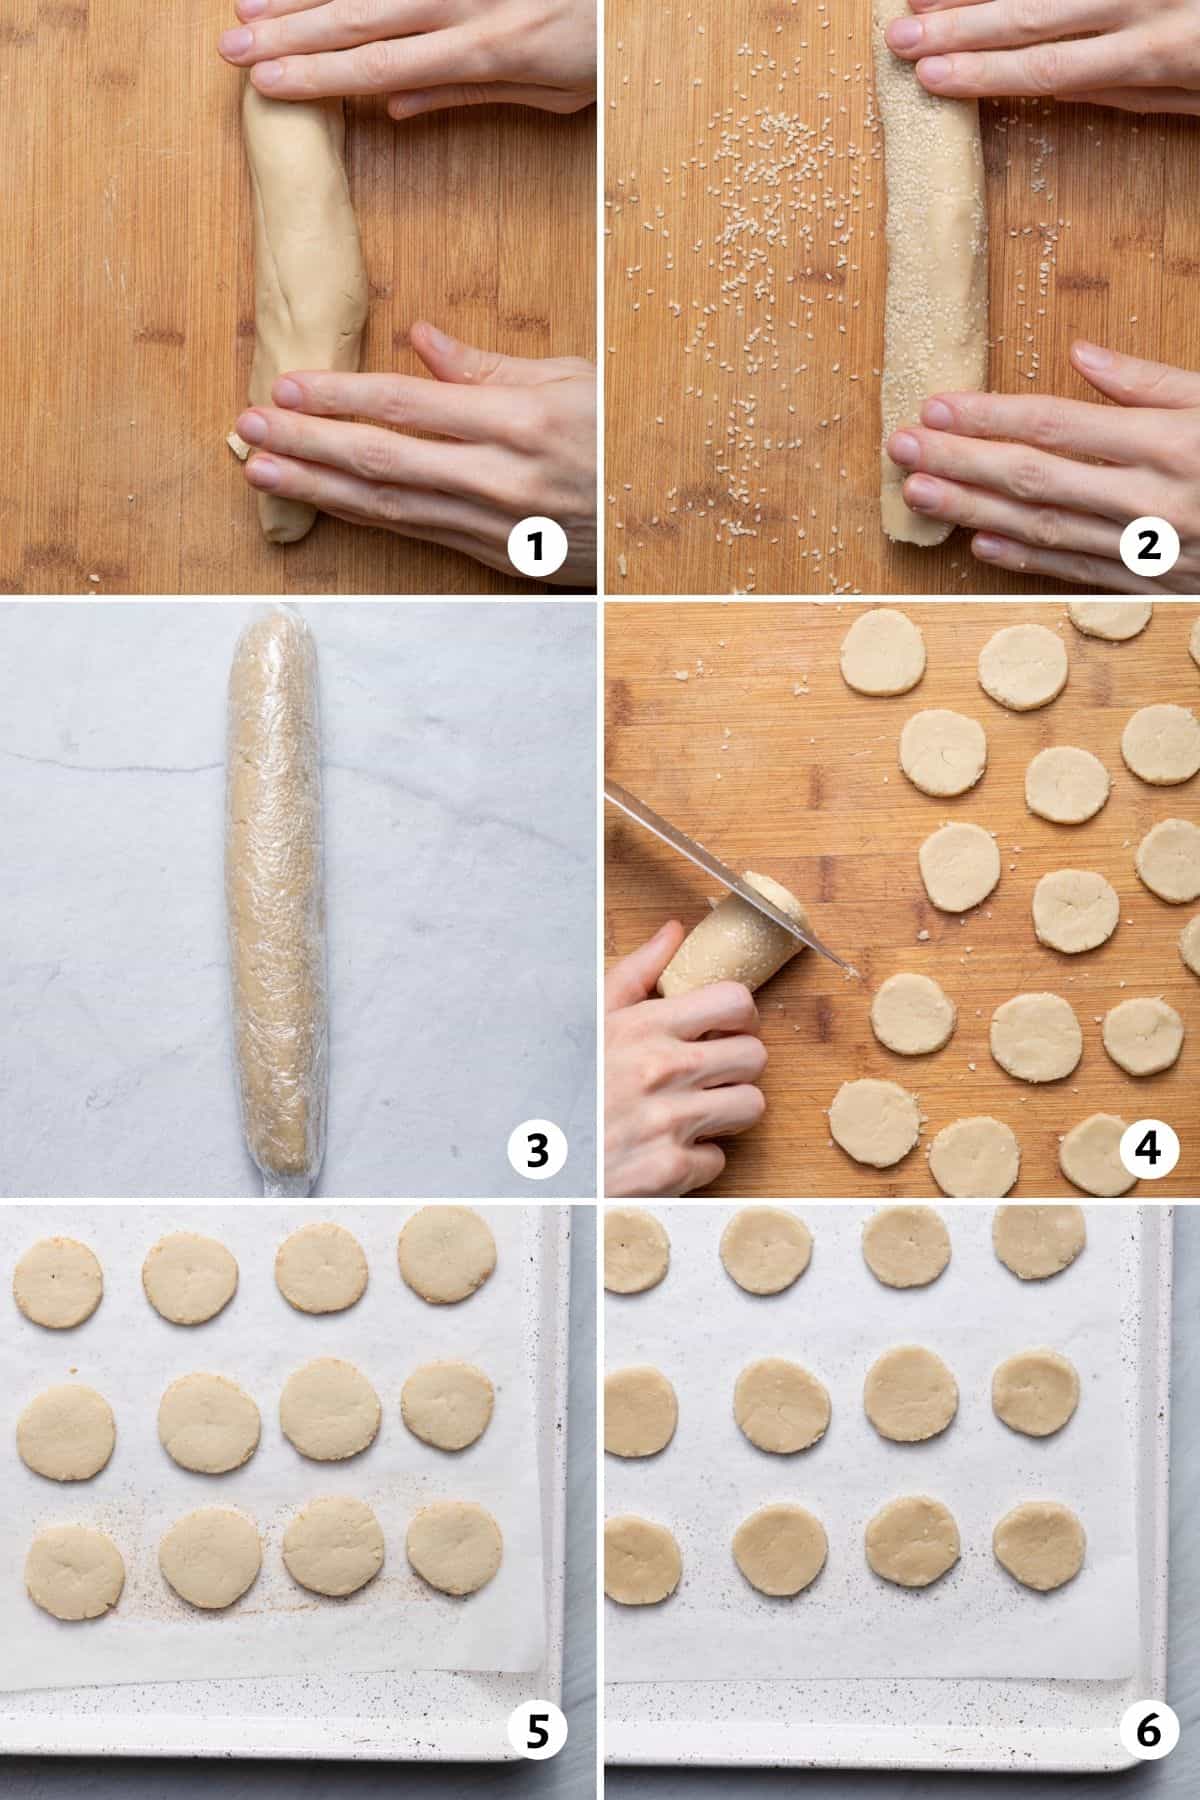 6 image collage to show how to roll the batter into a log and cut into discs